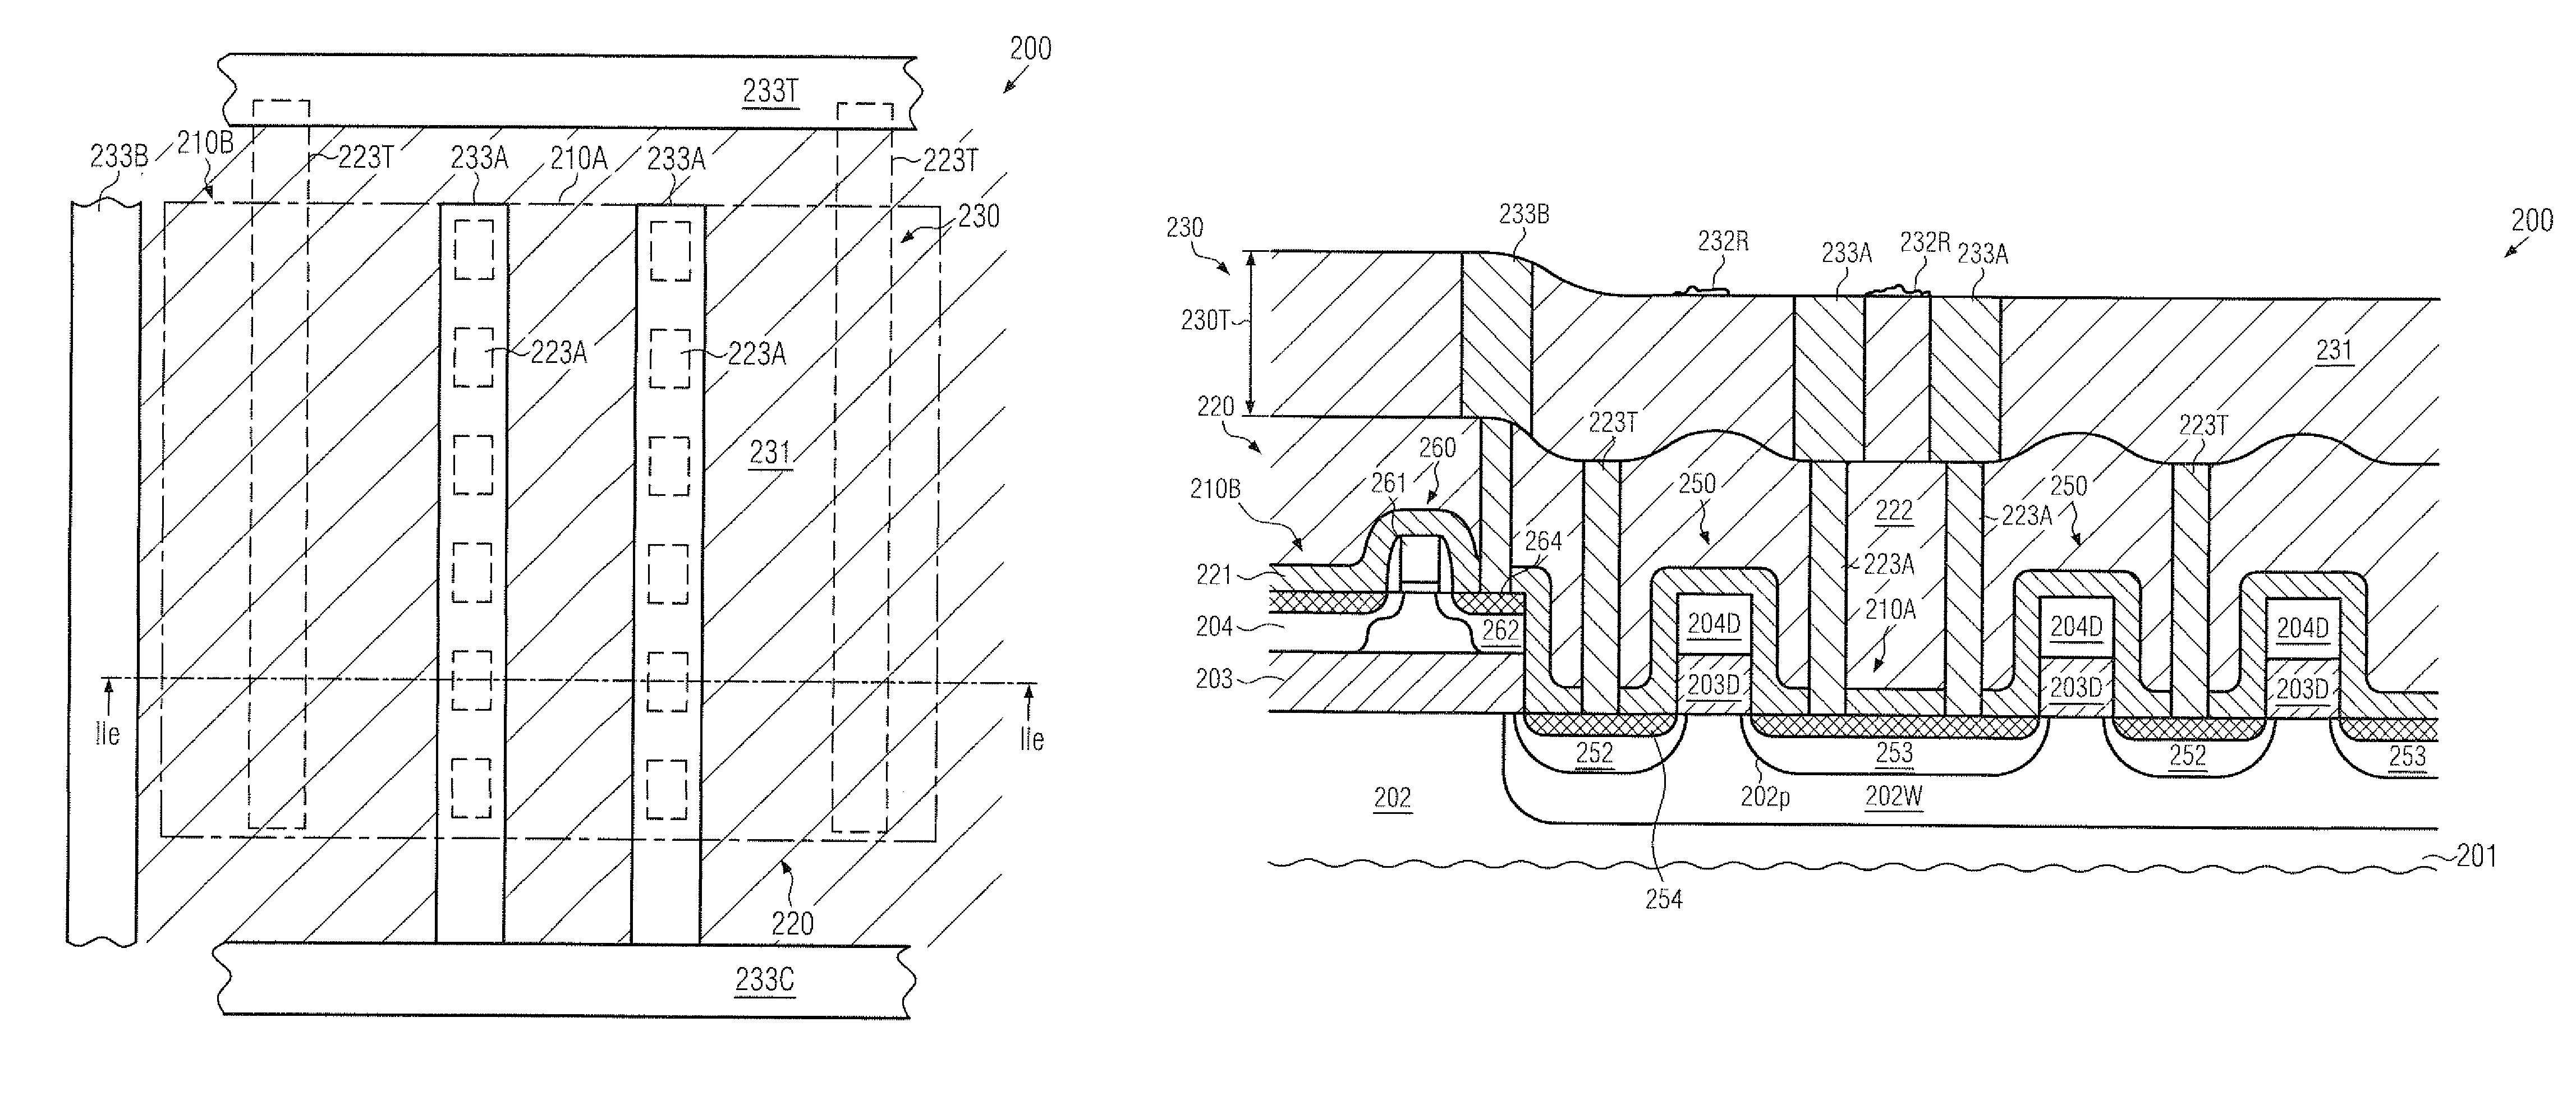 SOI semiconductor device comprising substrate diodes having a topography tolerant contact structure